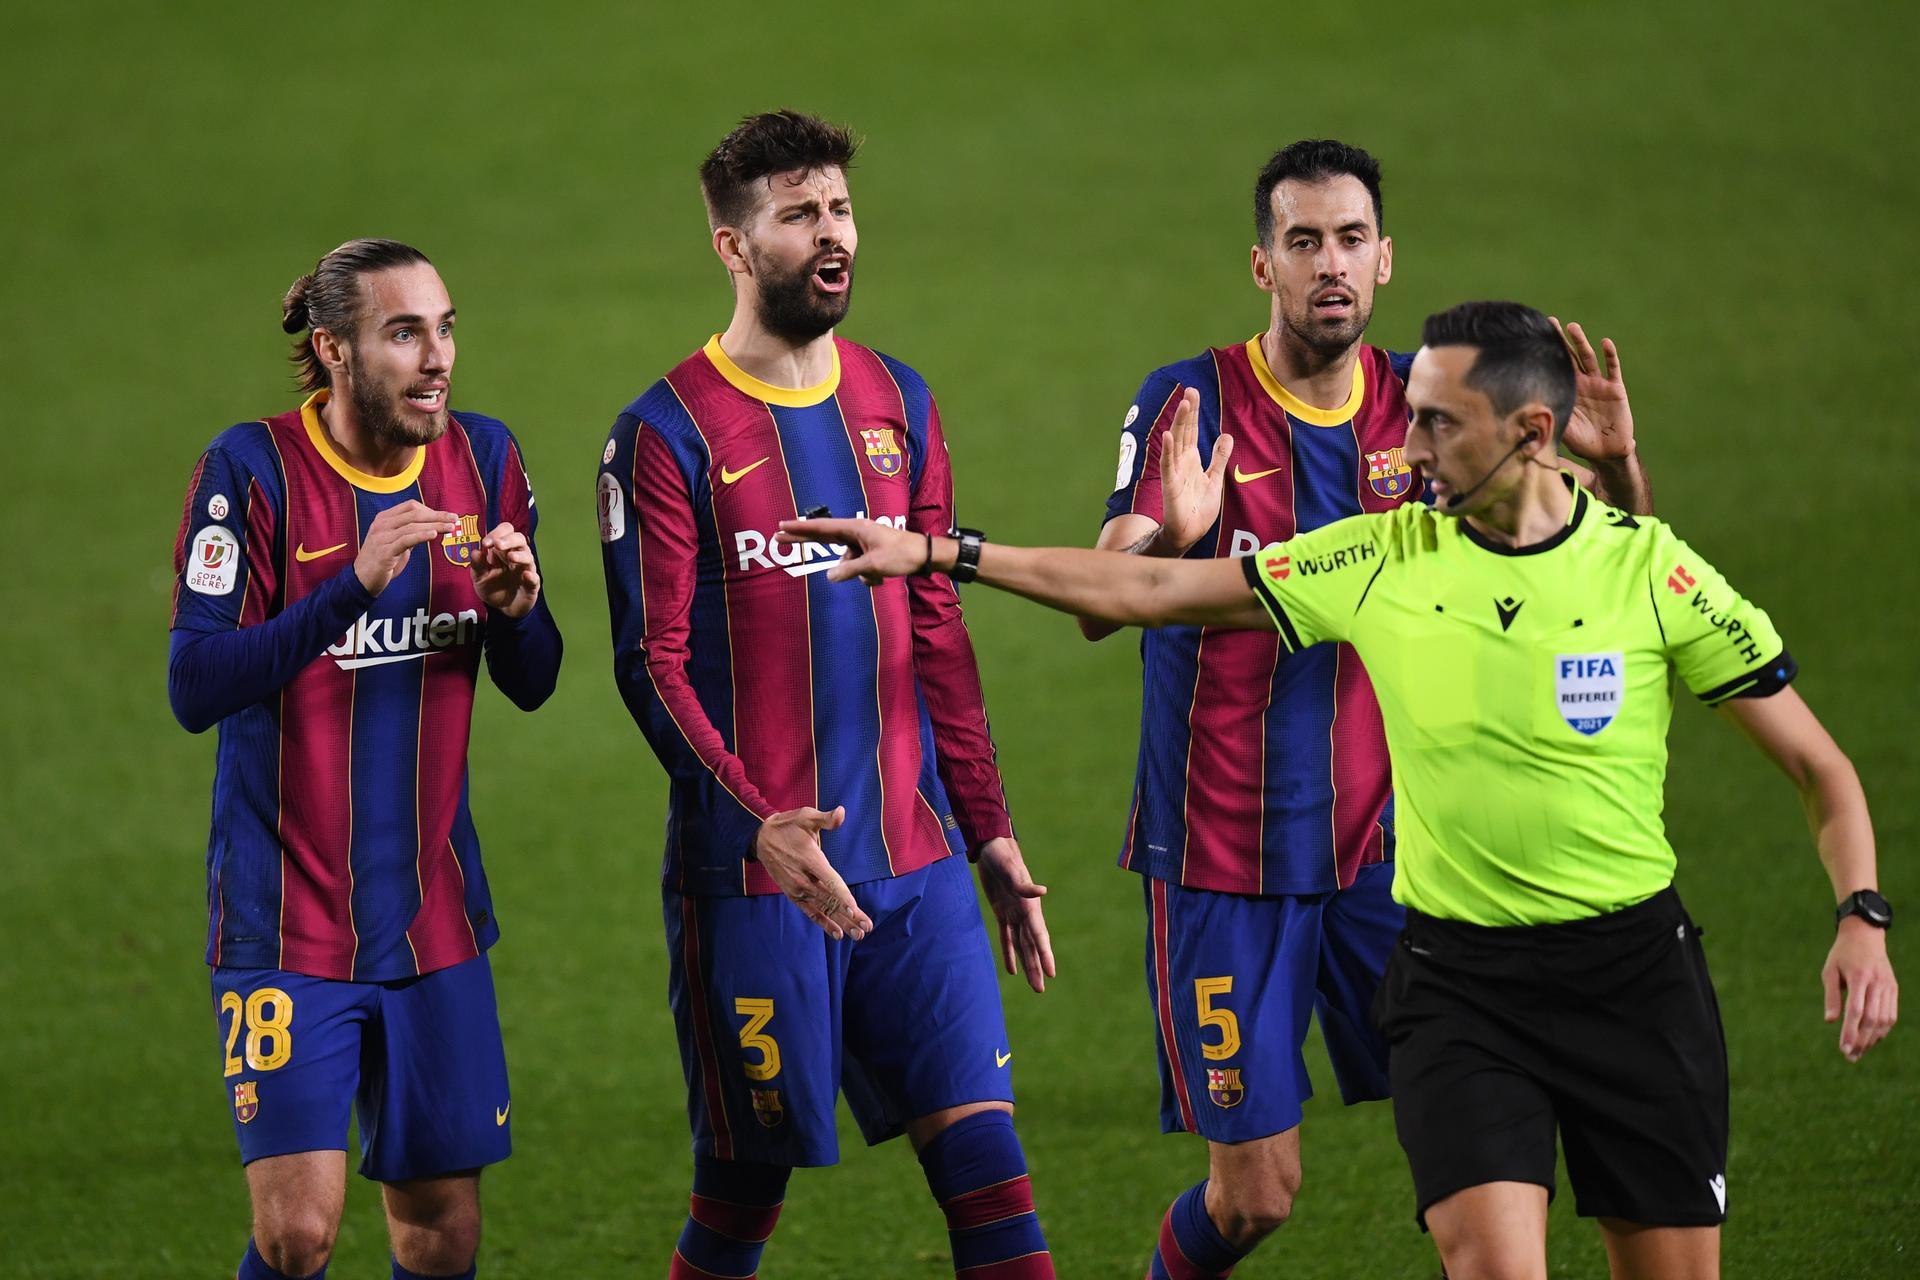 Determining the referee to catch El Clasico